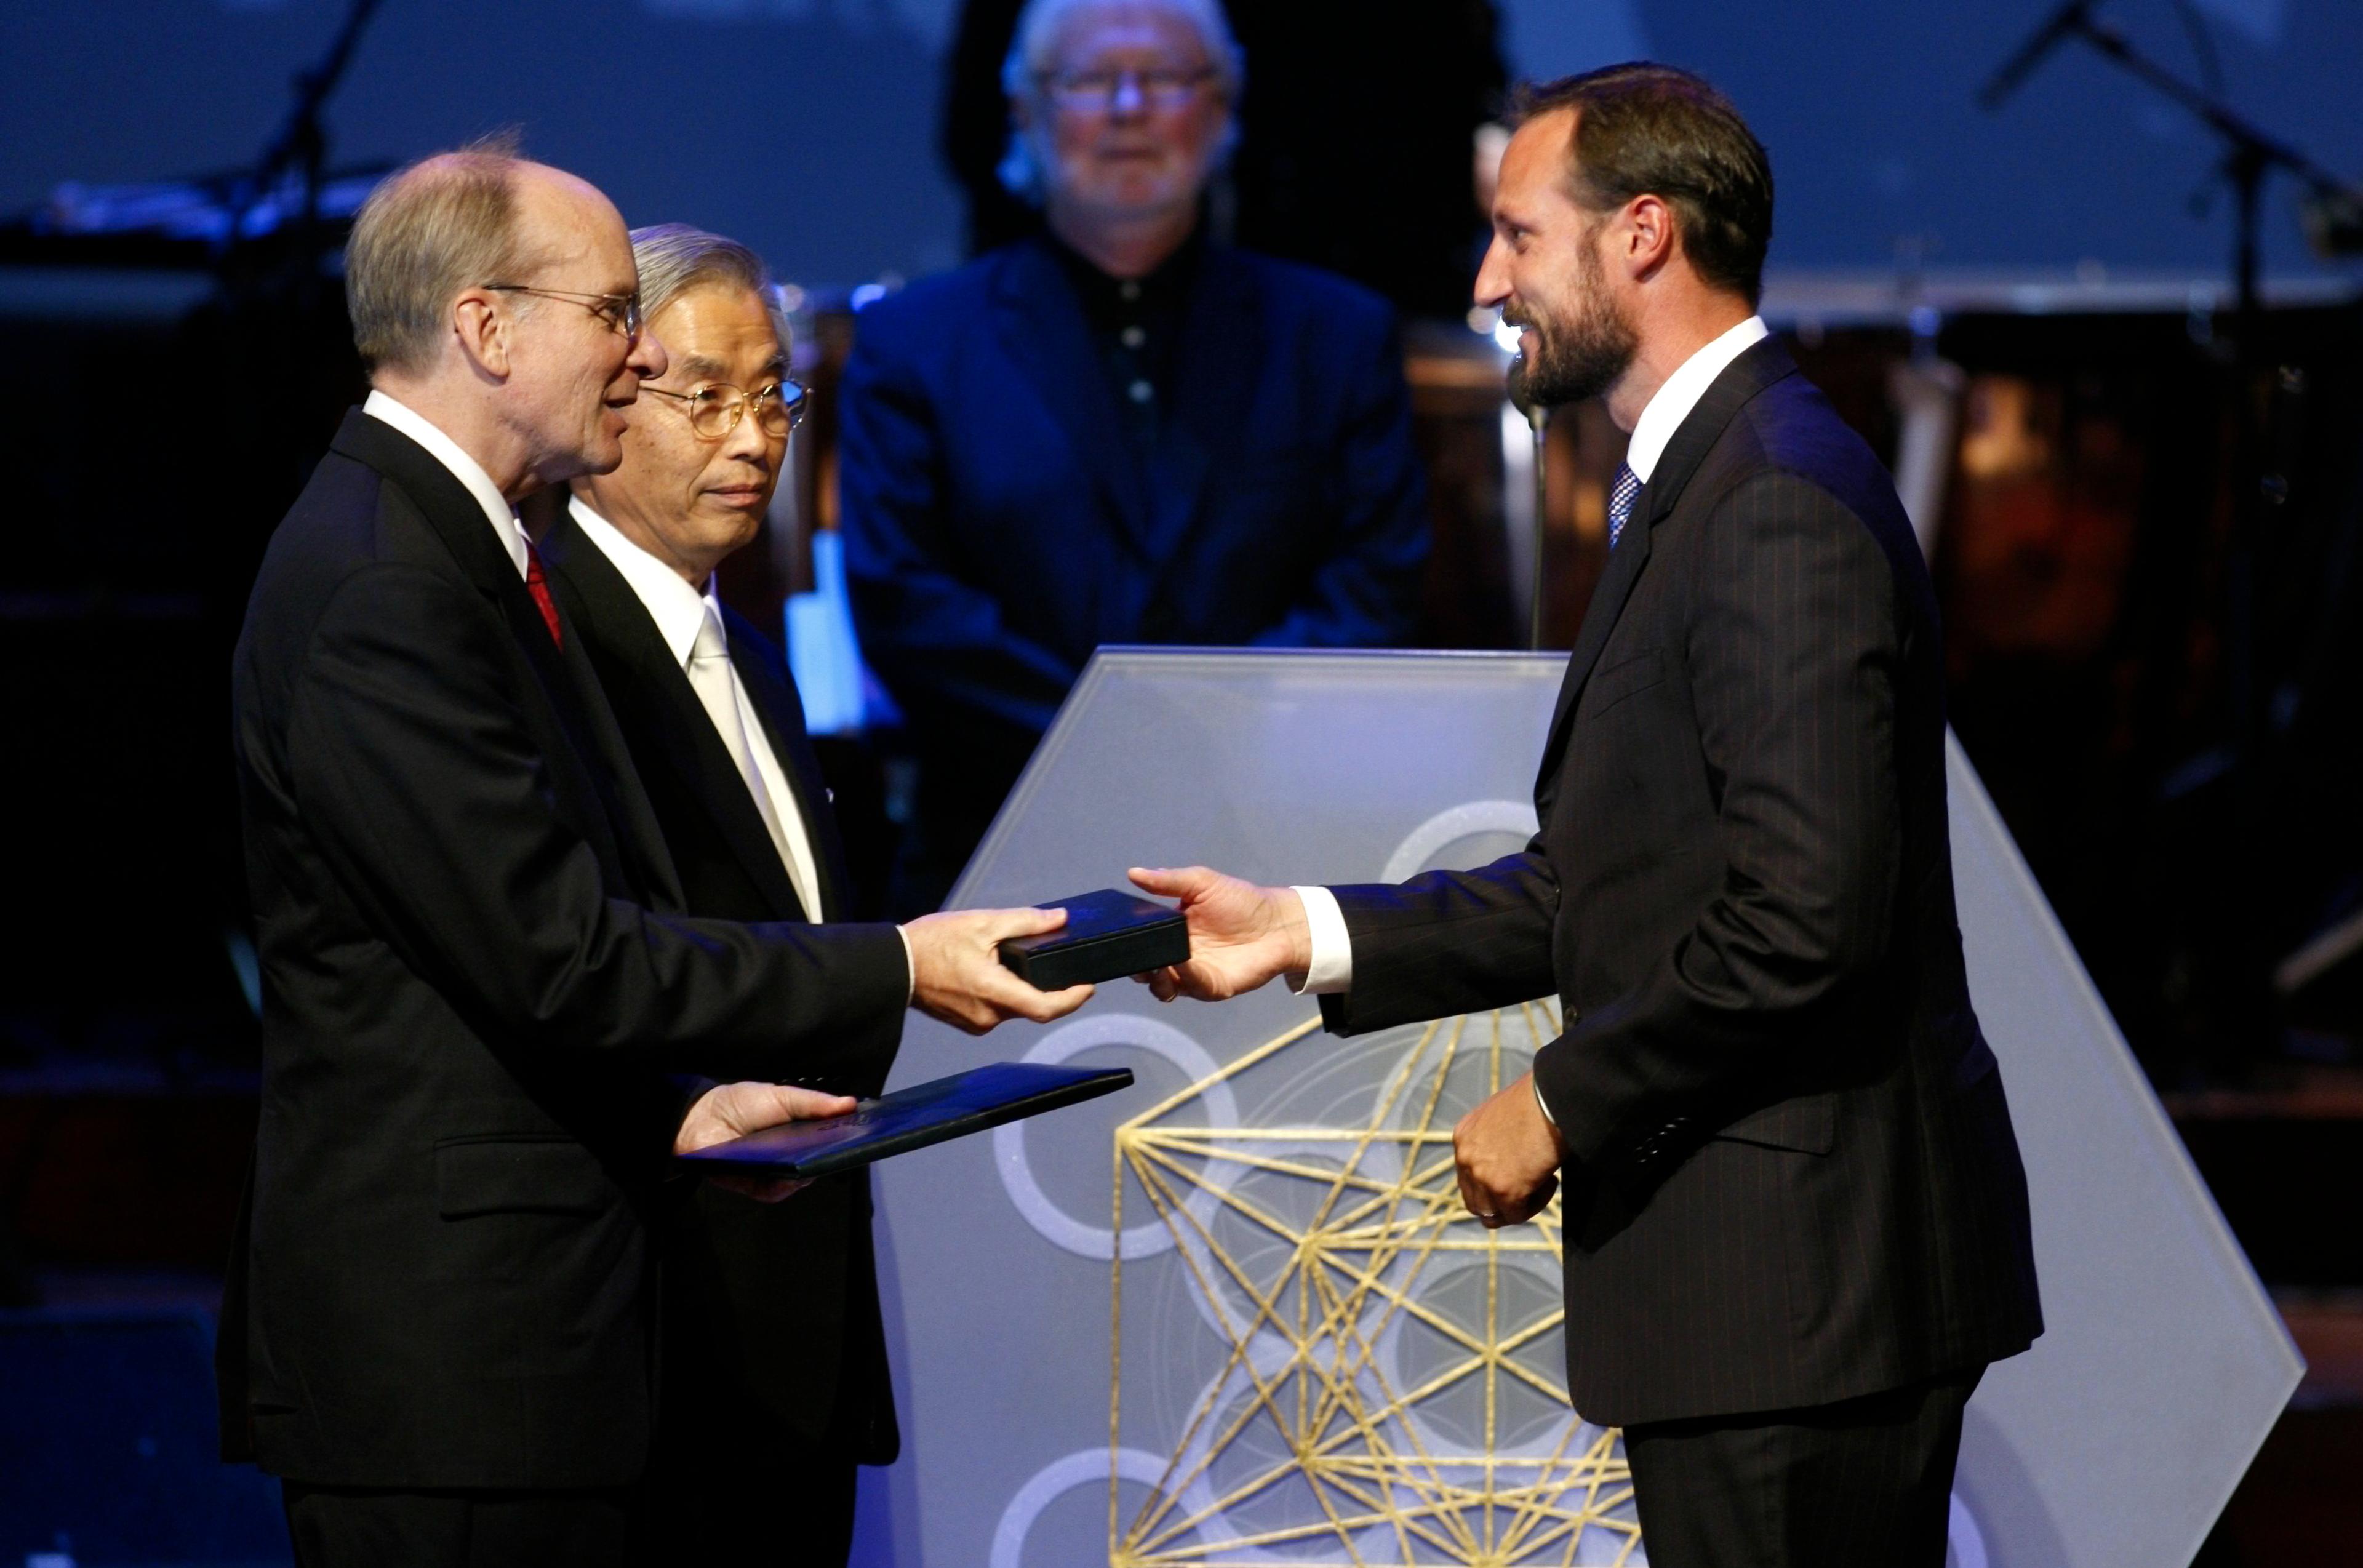 His Royal Highness Crown Prince Haakon presented the 2008 Kavli Prize in nanoscience